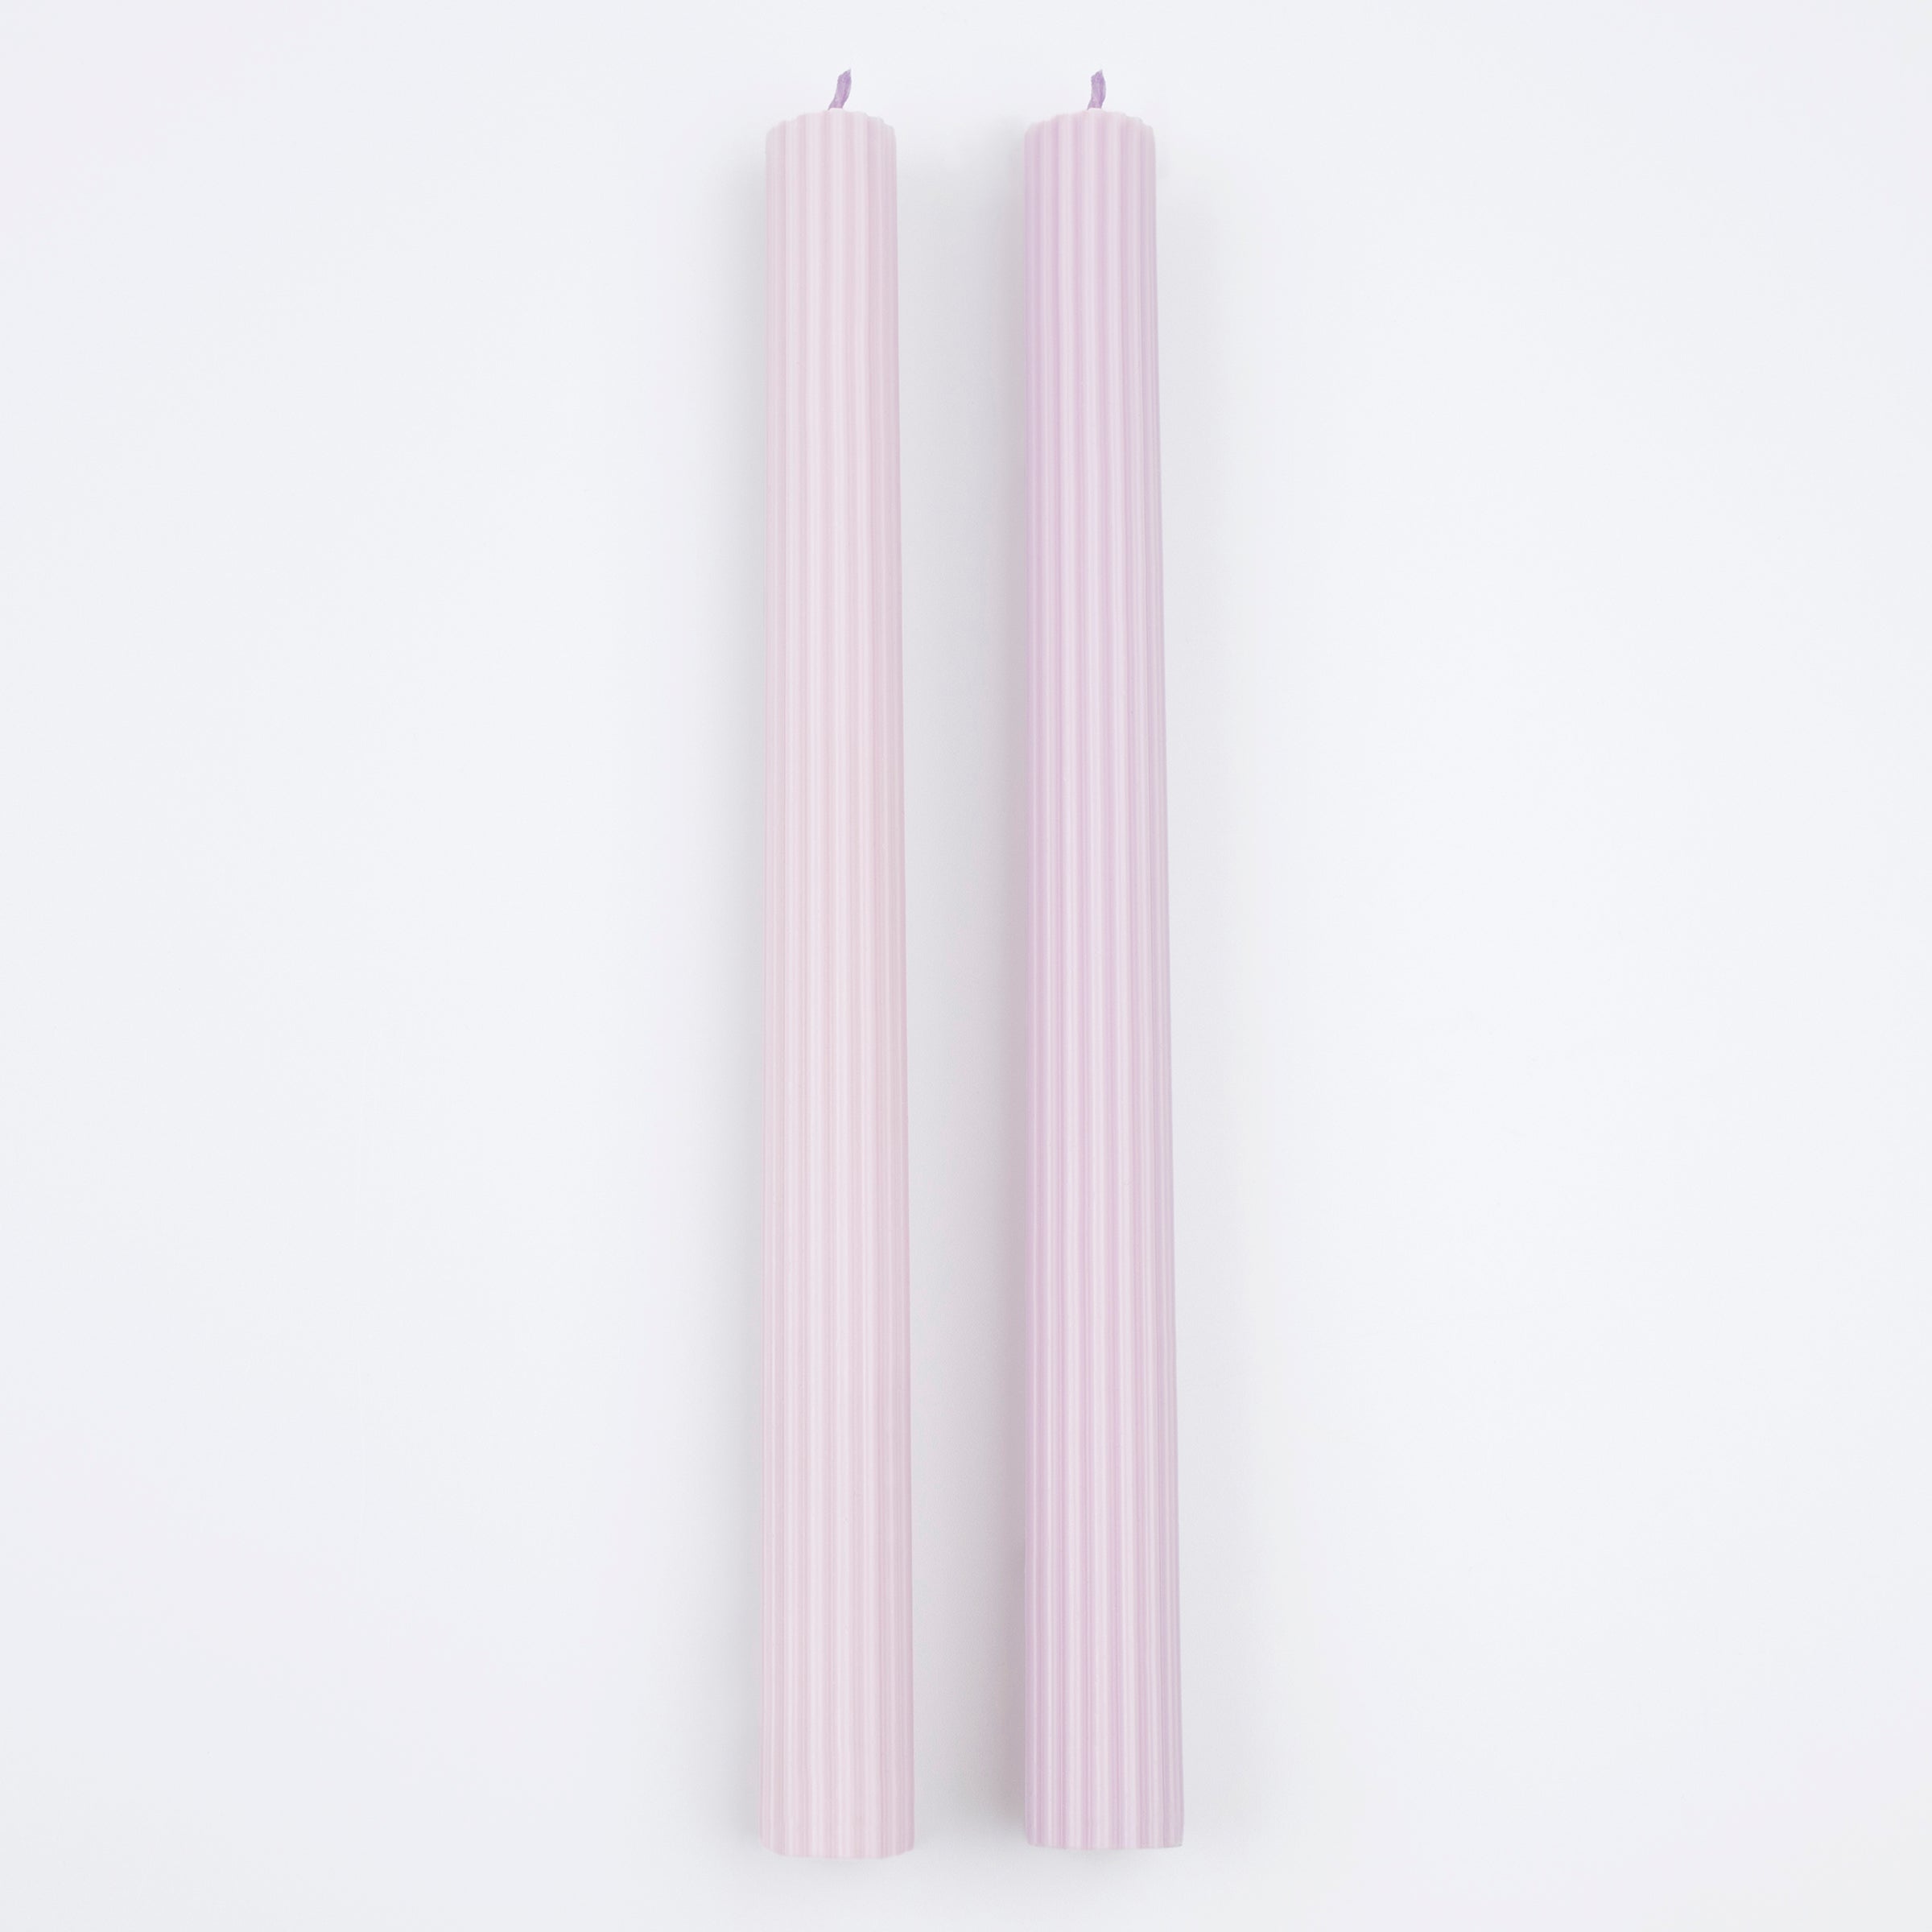 Our tall candles, in a lilac color, are perfect for any party with a purple theme.